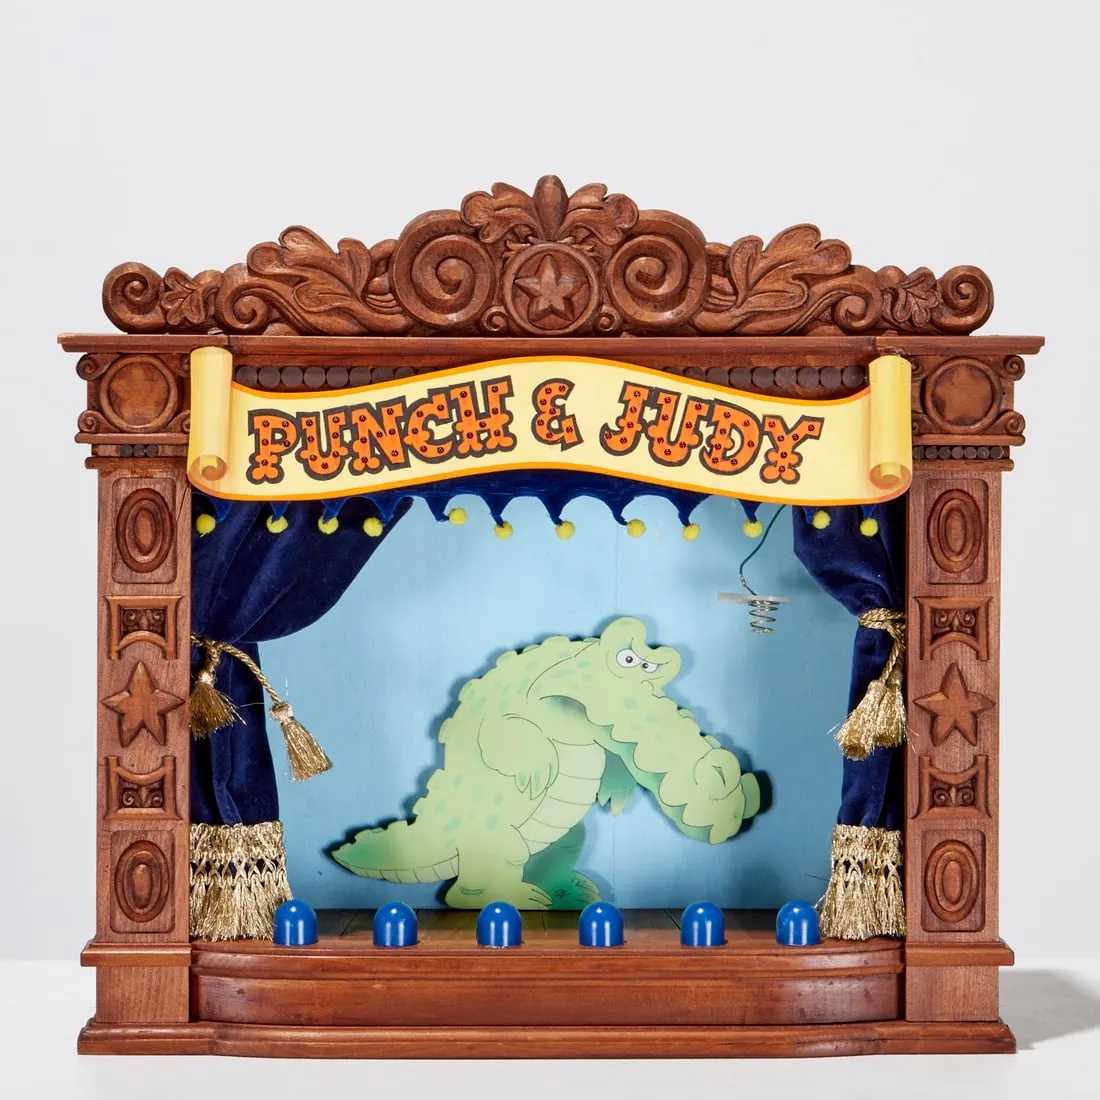 Rankin-Bass set piece for ‘Punch and Judy,’ estimated at $1,000-$1,500 at Millea Bros. May 16.